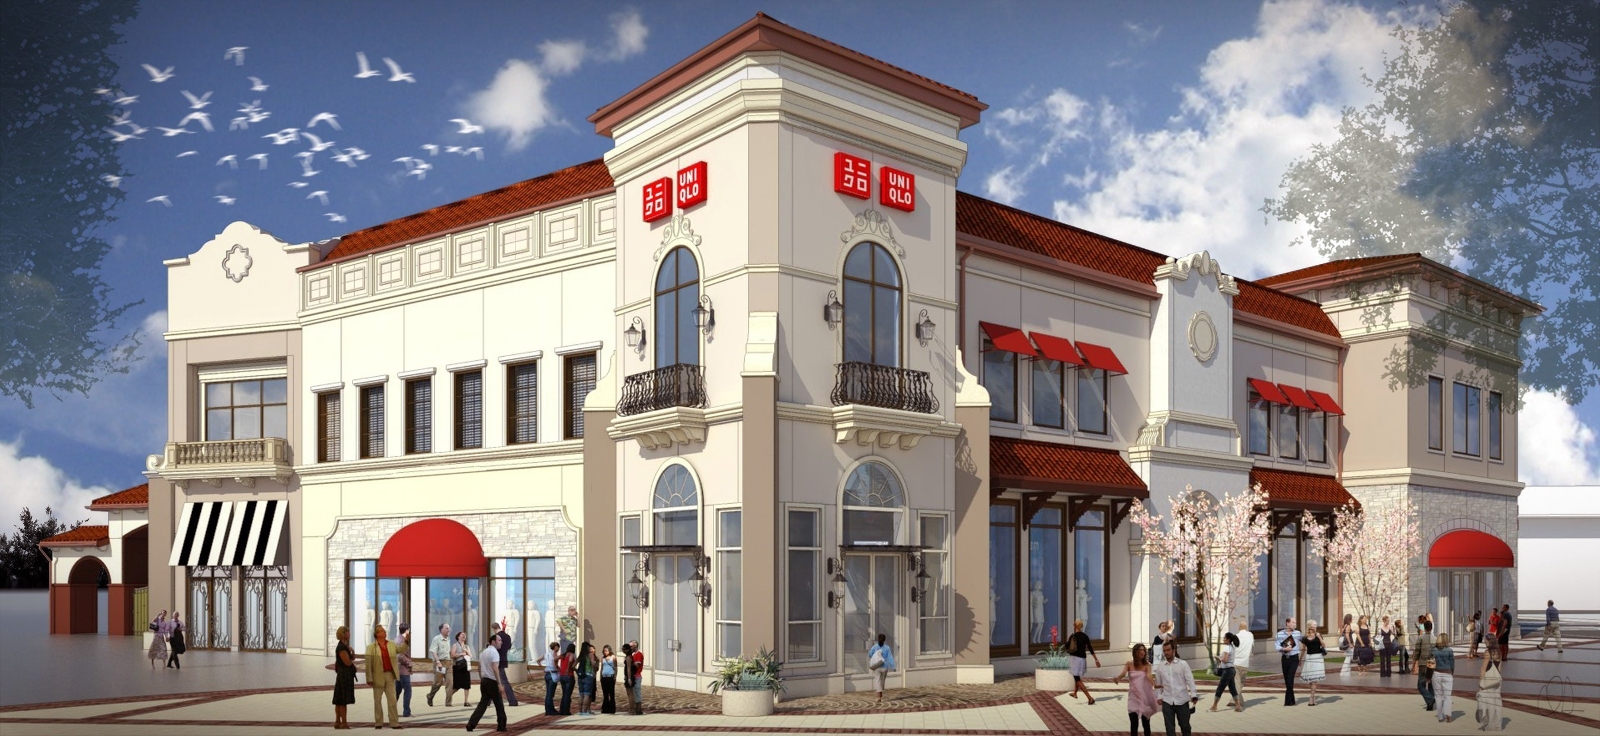 UNIQLO Opens in Disney Springs on July 15th